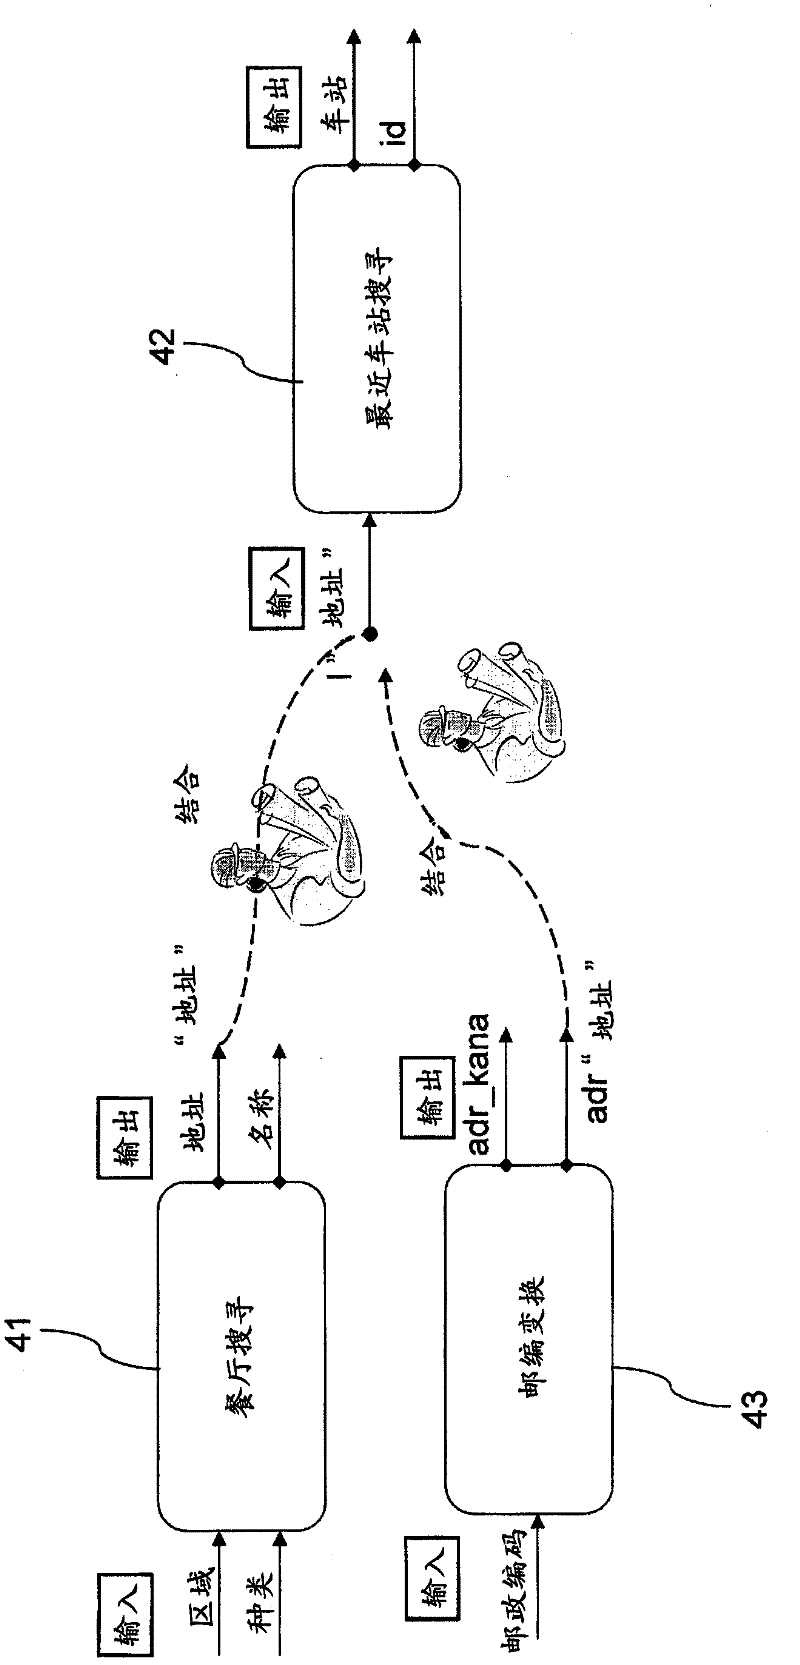 Device, method and computer program for supporting data connection between multiple applications